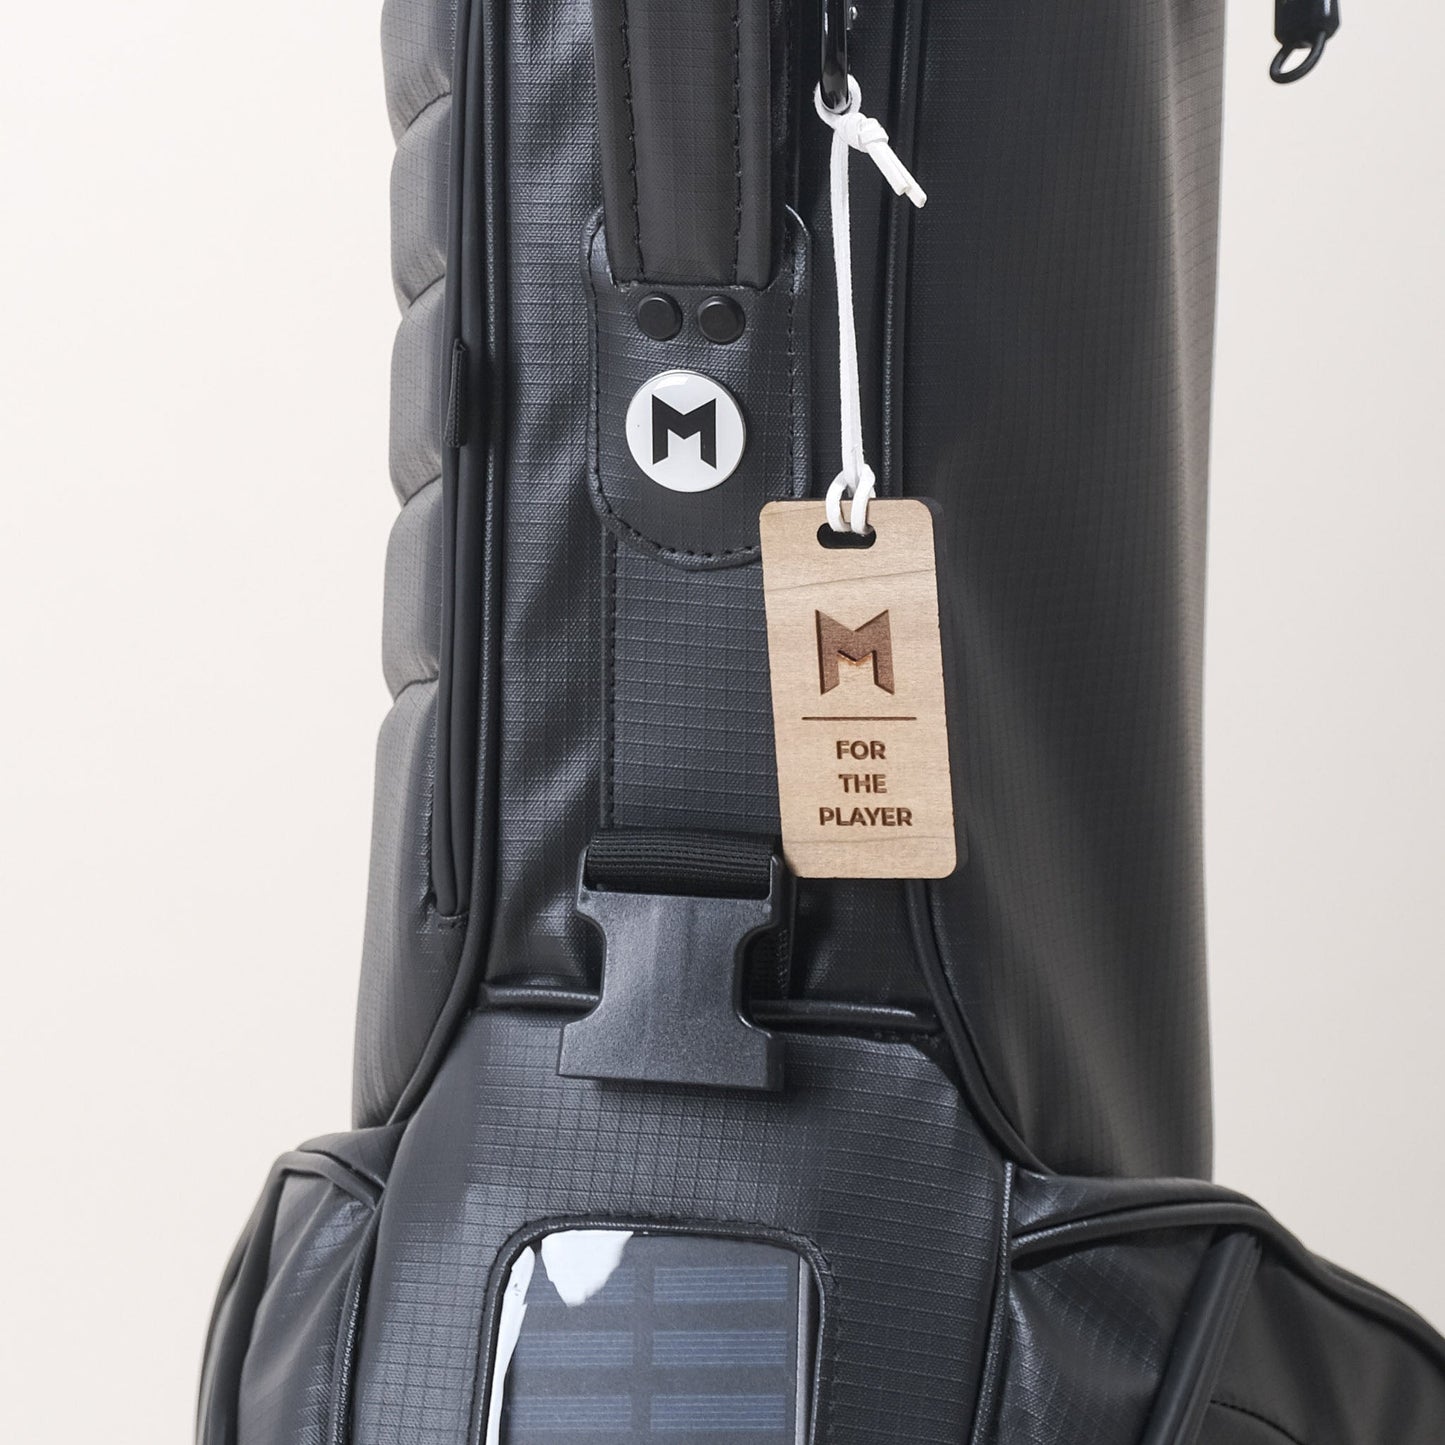 The black MNML GOLF MR1 bag is made from 100% recycled ripstop and features all magnetic pockets; available for purchase through MNML GOLF's Trade It Forward program.